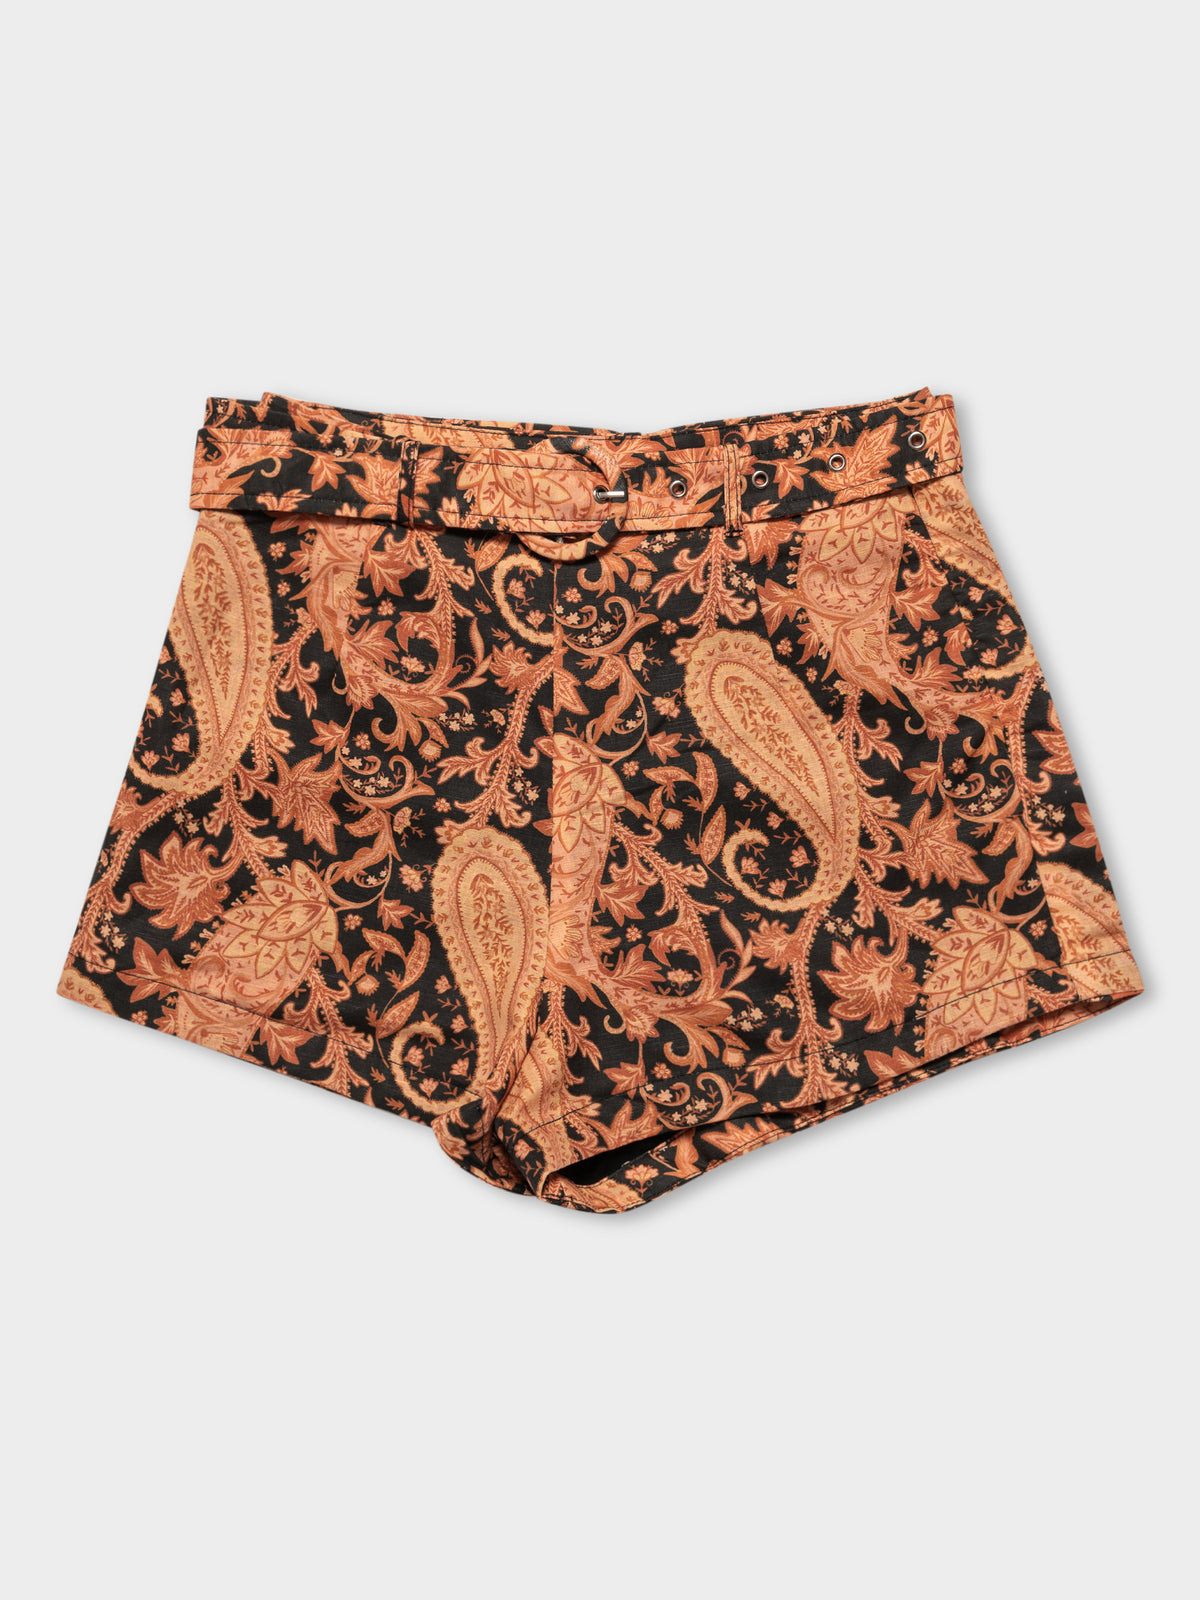 Kelly Shorts in Burnt Paisely Print